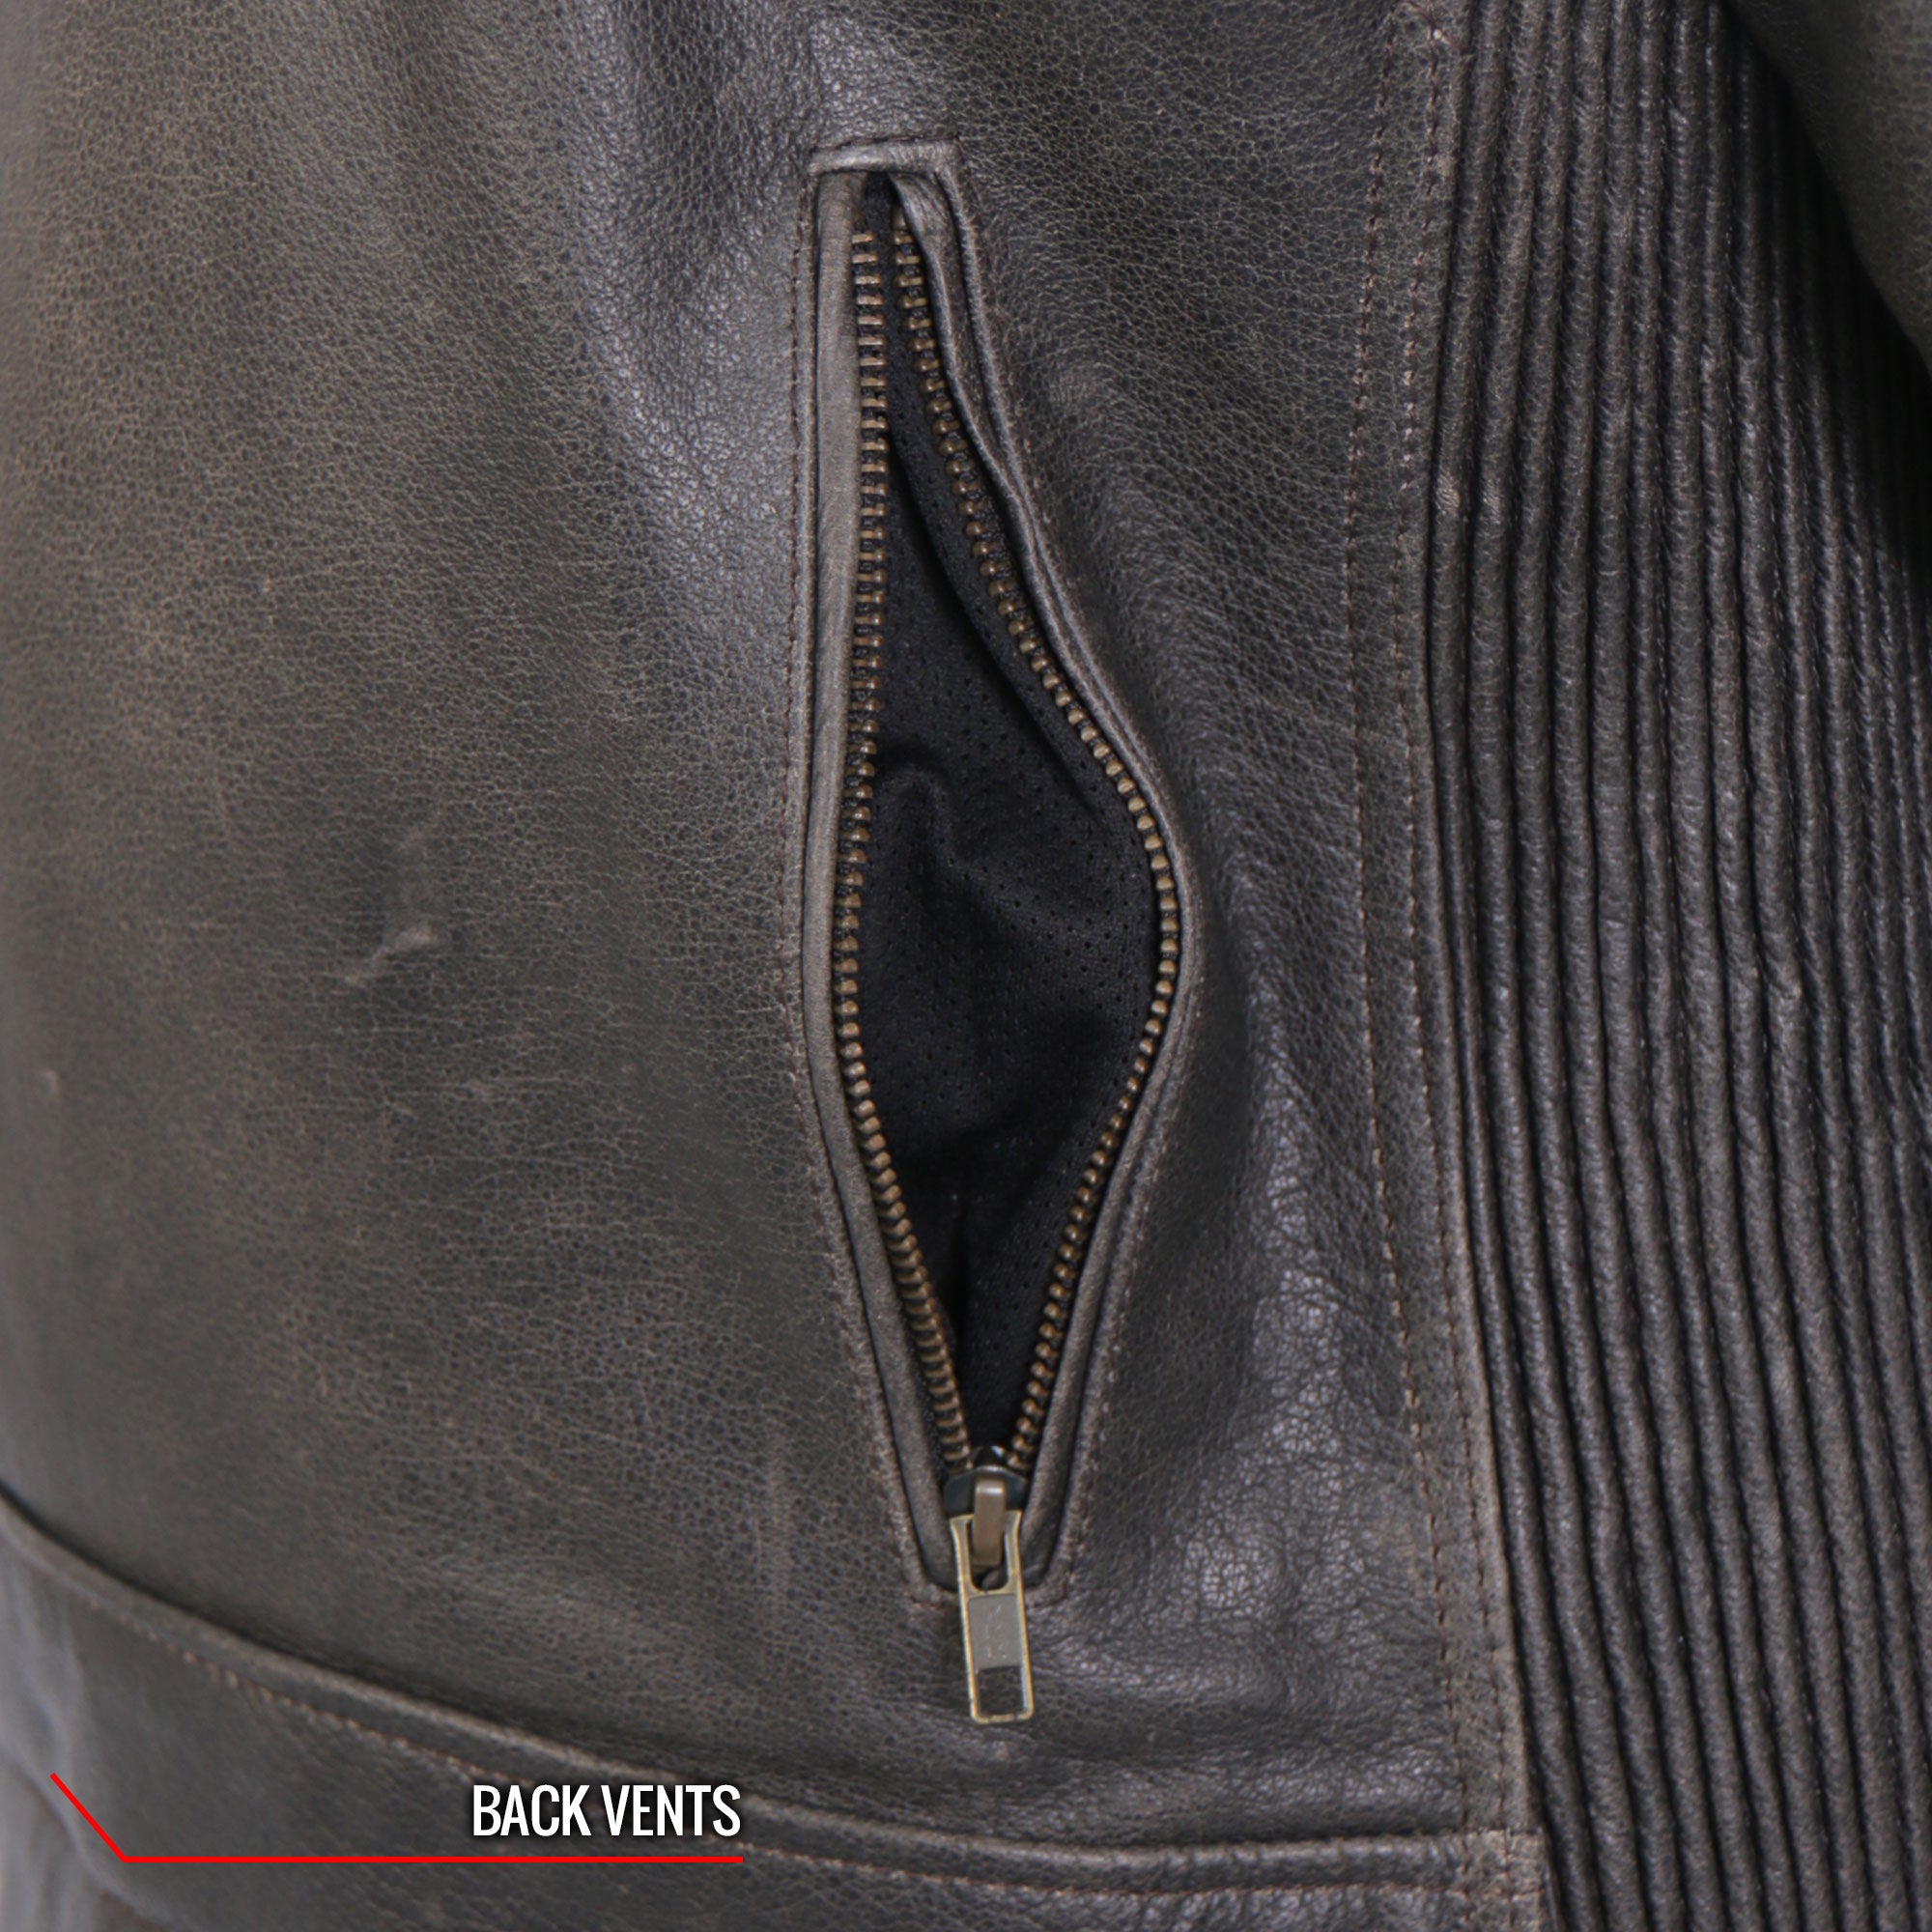 Hot Leathers JKM1029 Men’s Distress Brown Motorcycle style ‘Carry and Conceal’ Leather Biker Jacket